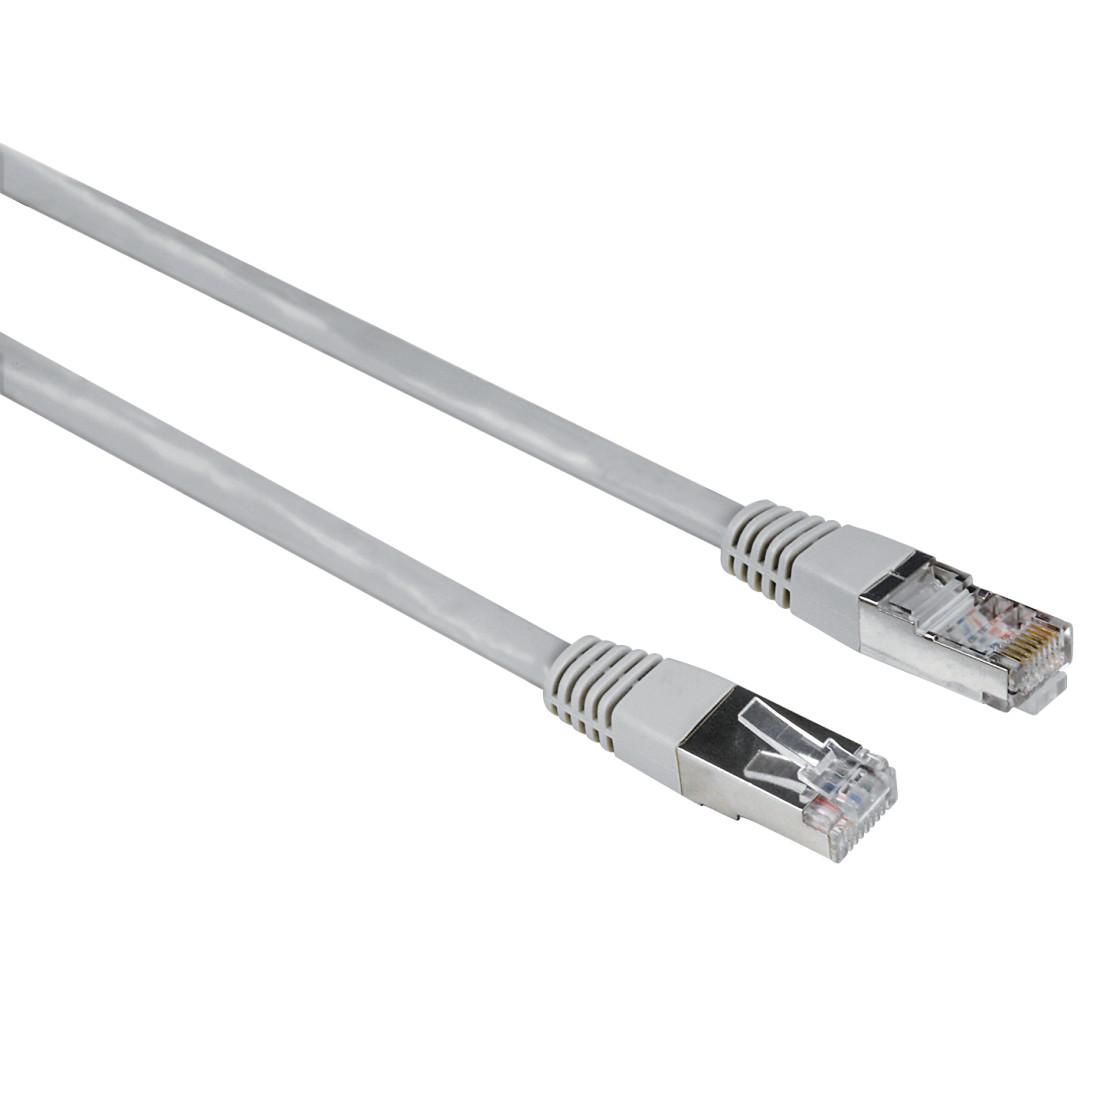 Hama Hama Cat5e Patch Cable F/Utp Shielded 20 Metres Grey 